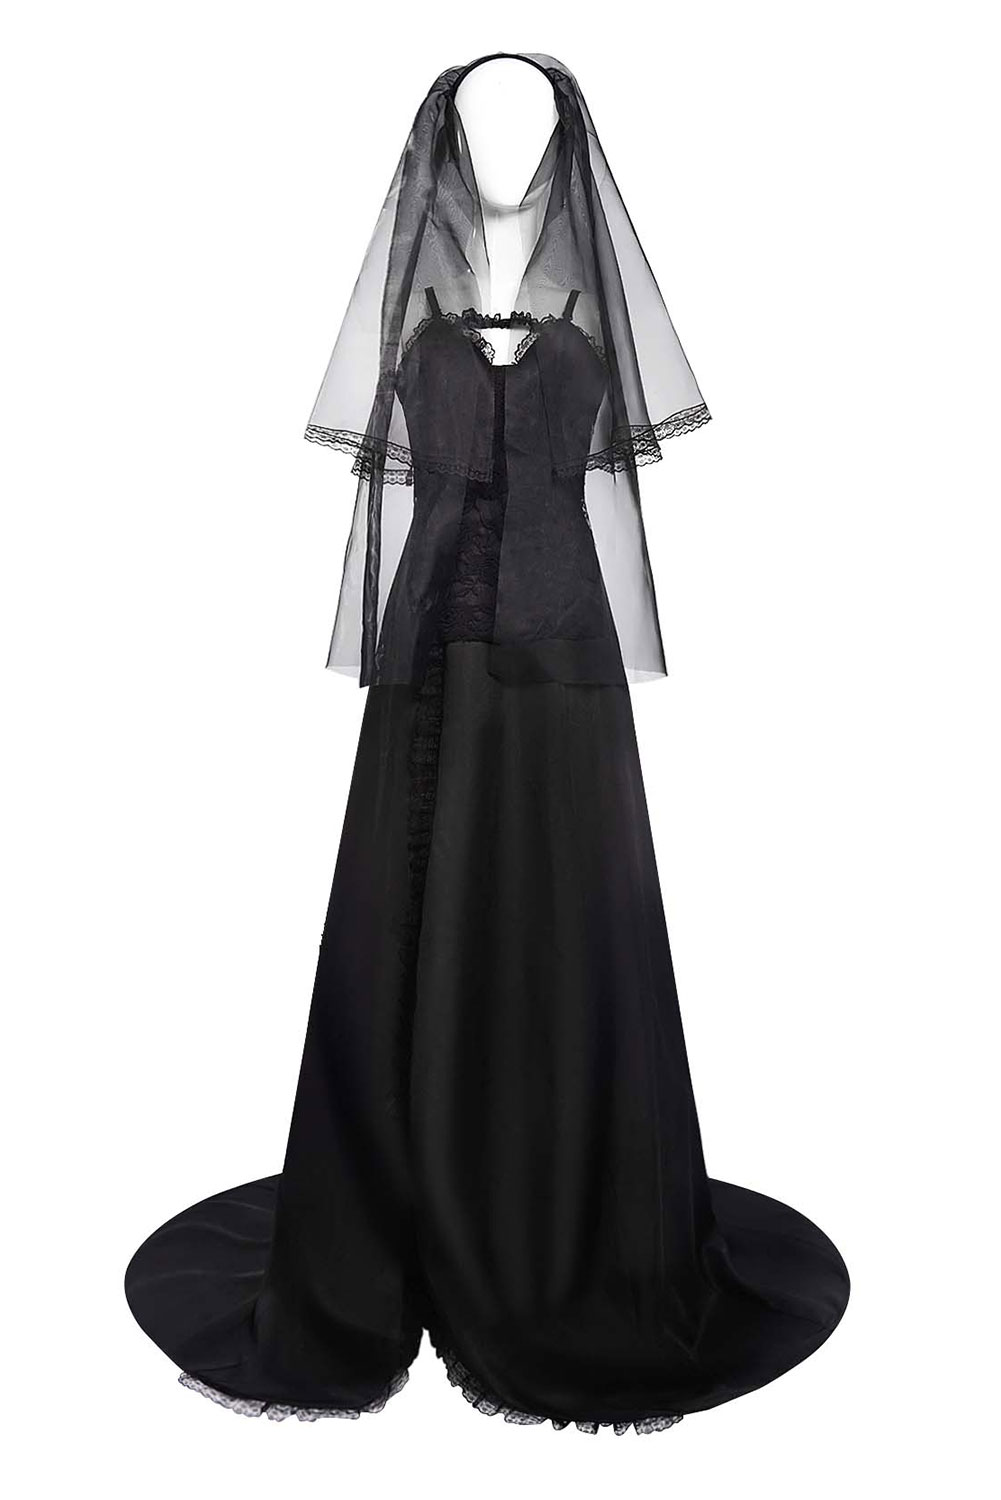 Movie Beetlejuice 2 Astrid Deetz Women Gothic Black Wedding Gown Dress Outfits Halloween Carnival Suit Cosplay Costume